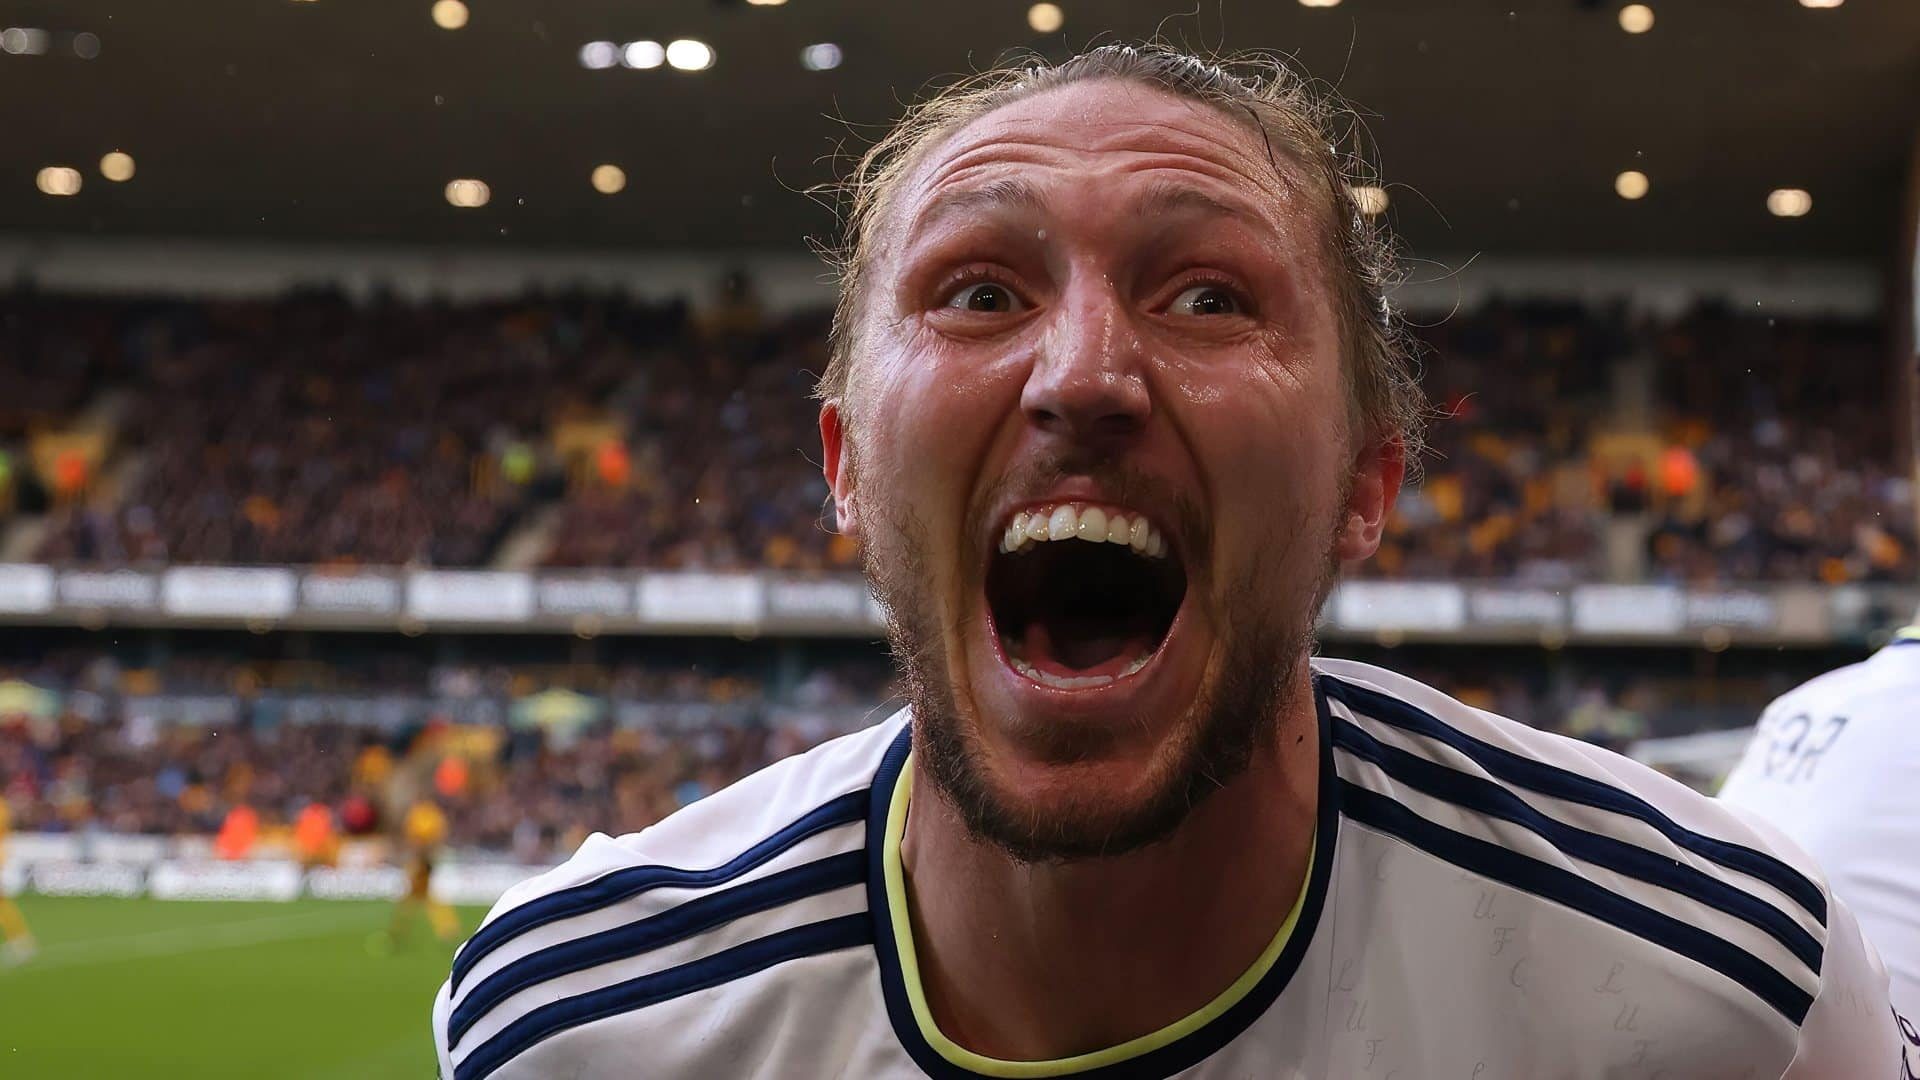 A close up of Luke Ayling's face as he celebrates Rasmus Kristensen's goal against Wolves — his eyes are almost out on stalks, he could be screaming, laughing or crying, it's probably all three at once